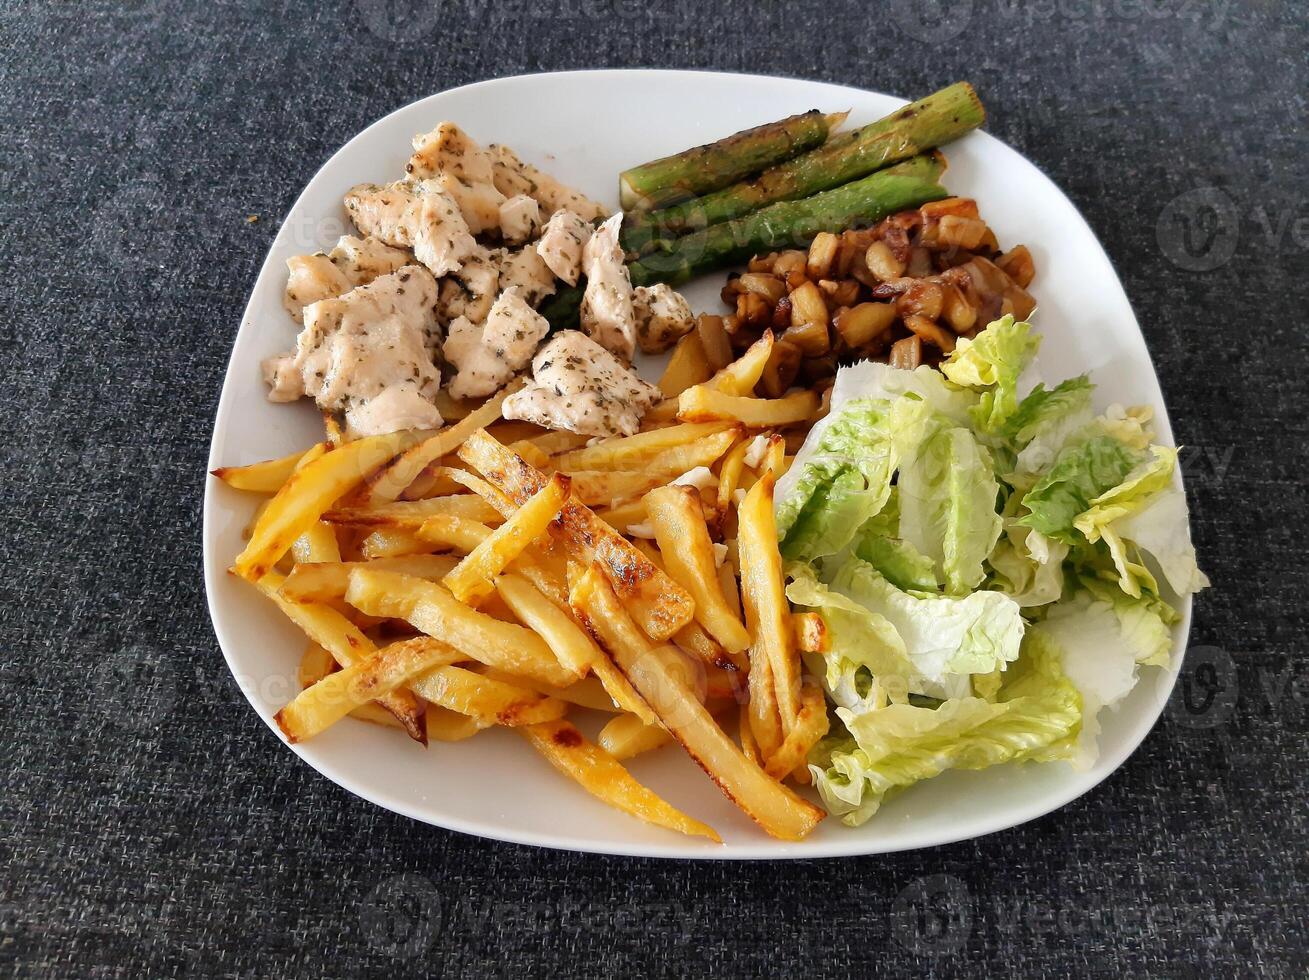 Homemade grilled chicken with french fries, asparagus, grilled chopped eggplant and green salad, served on a white plate photo